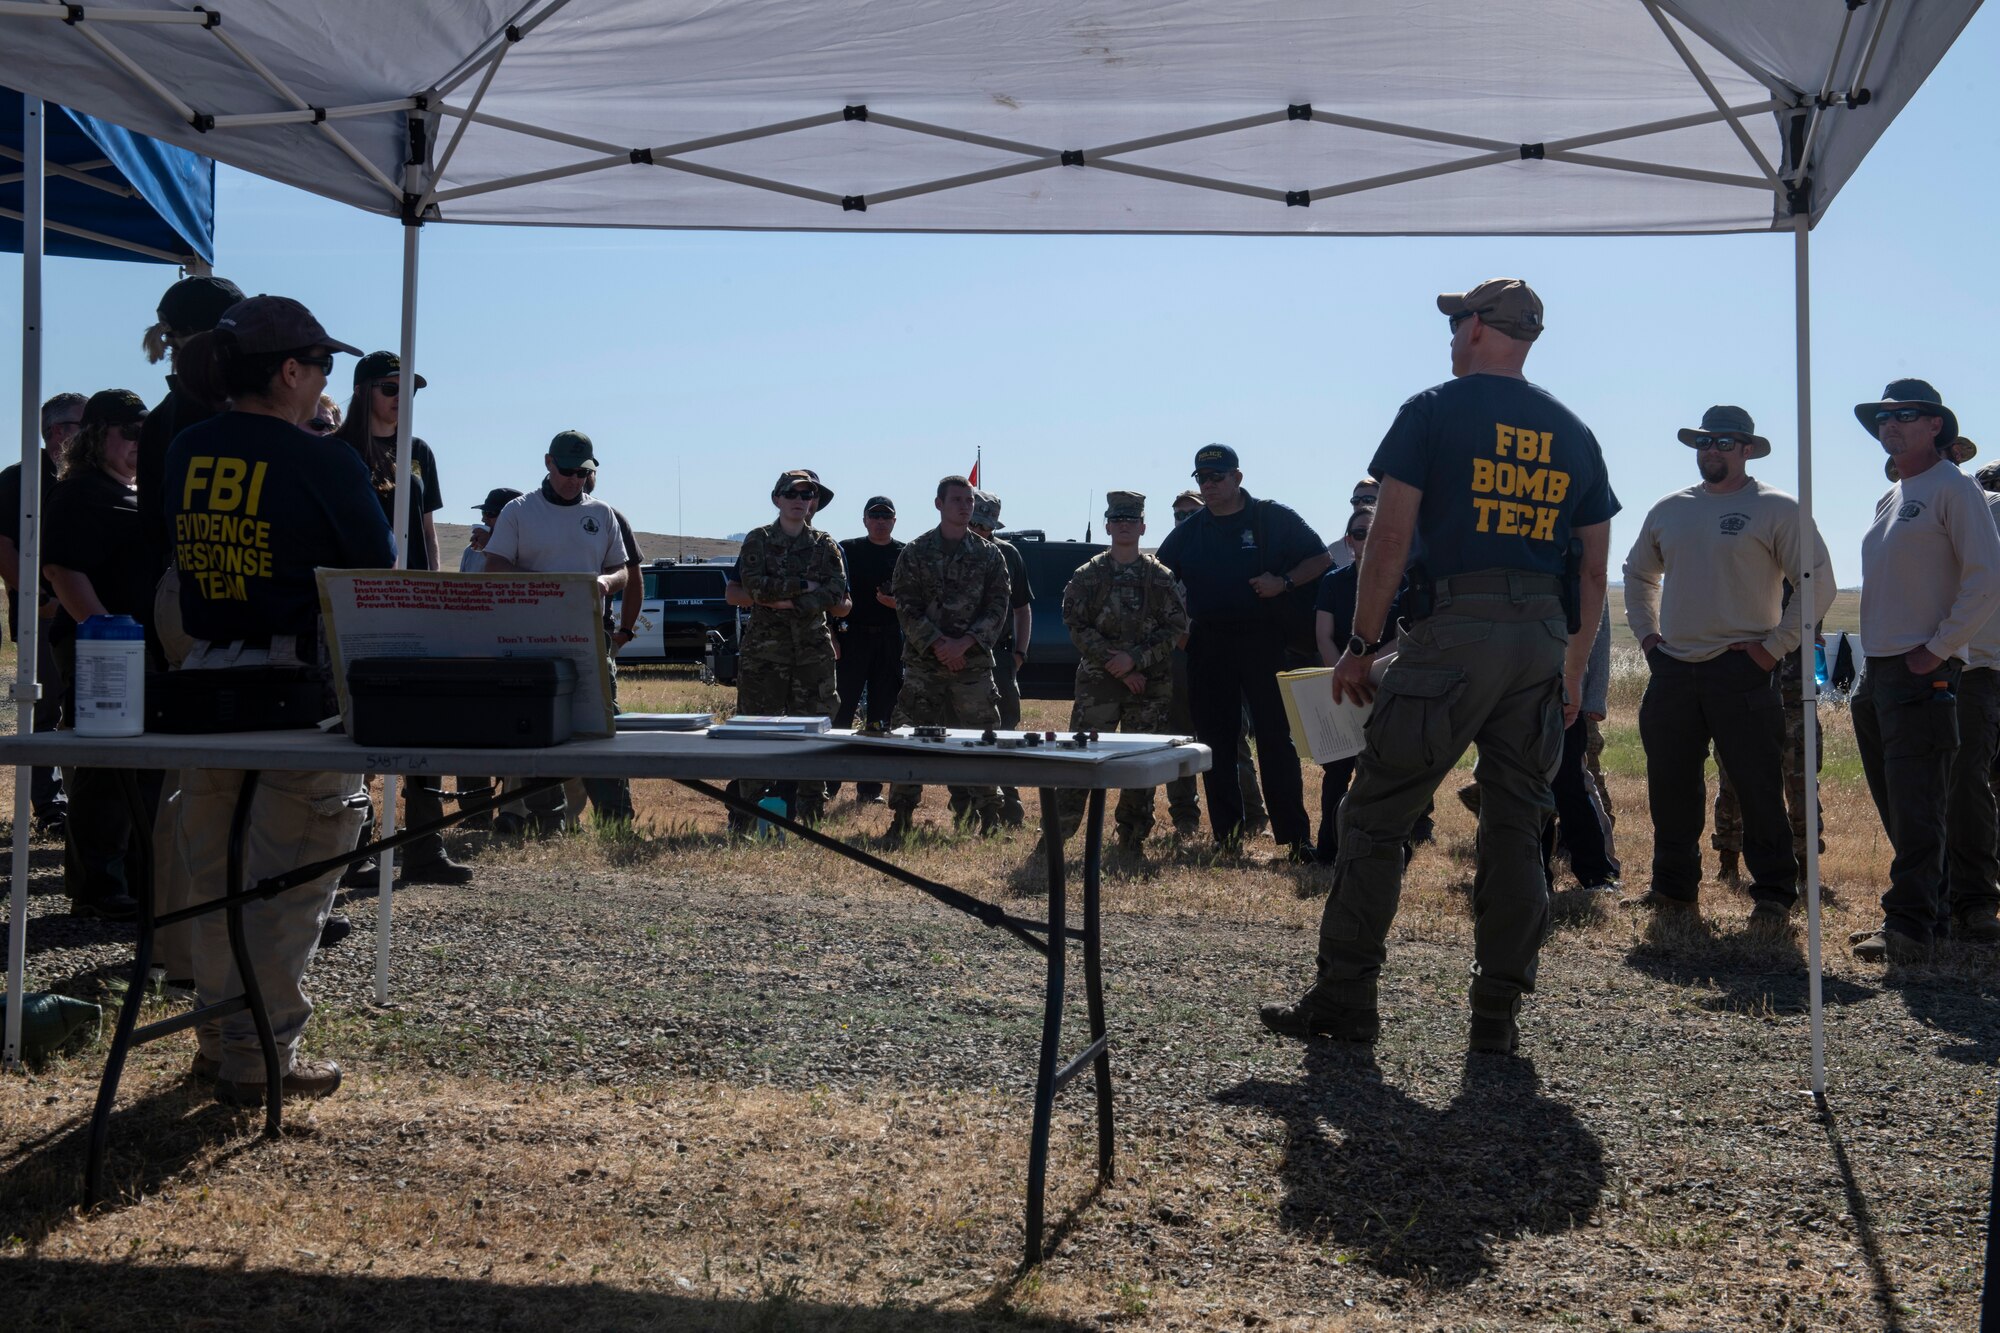 FBI bomb technicians teach Air Force and local law enforcement members about the history of vehicle-borne improvised explosive devices.